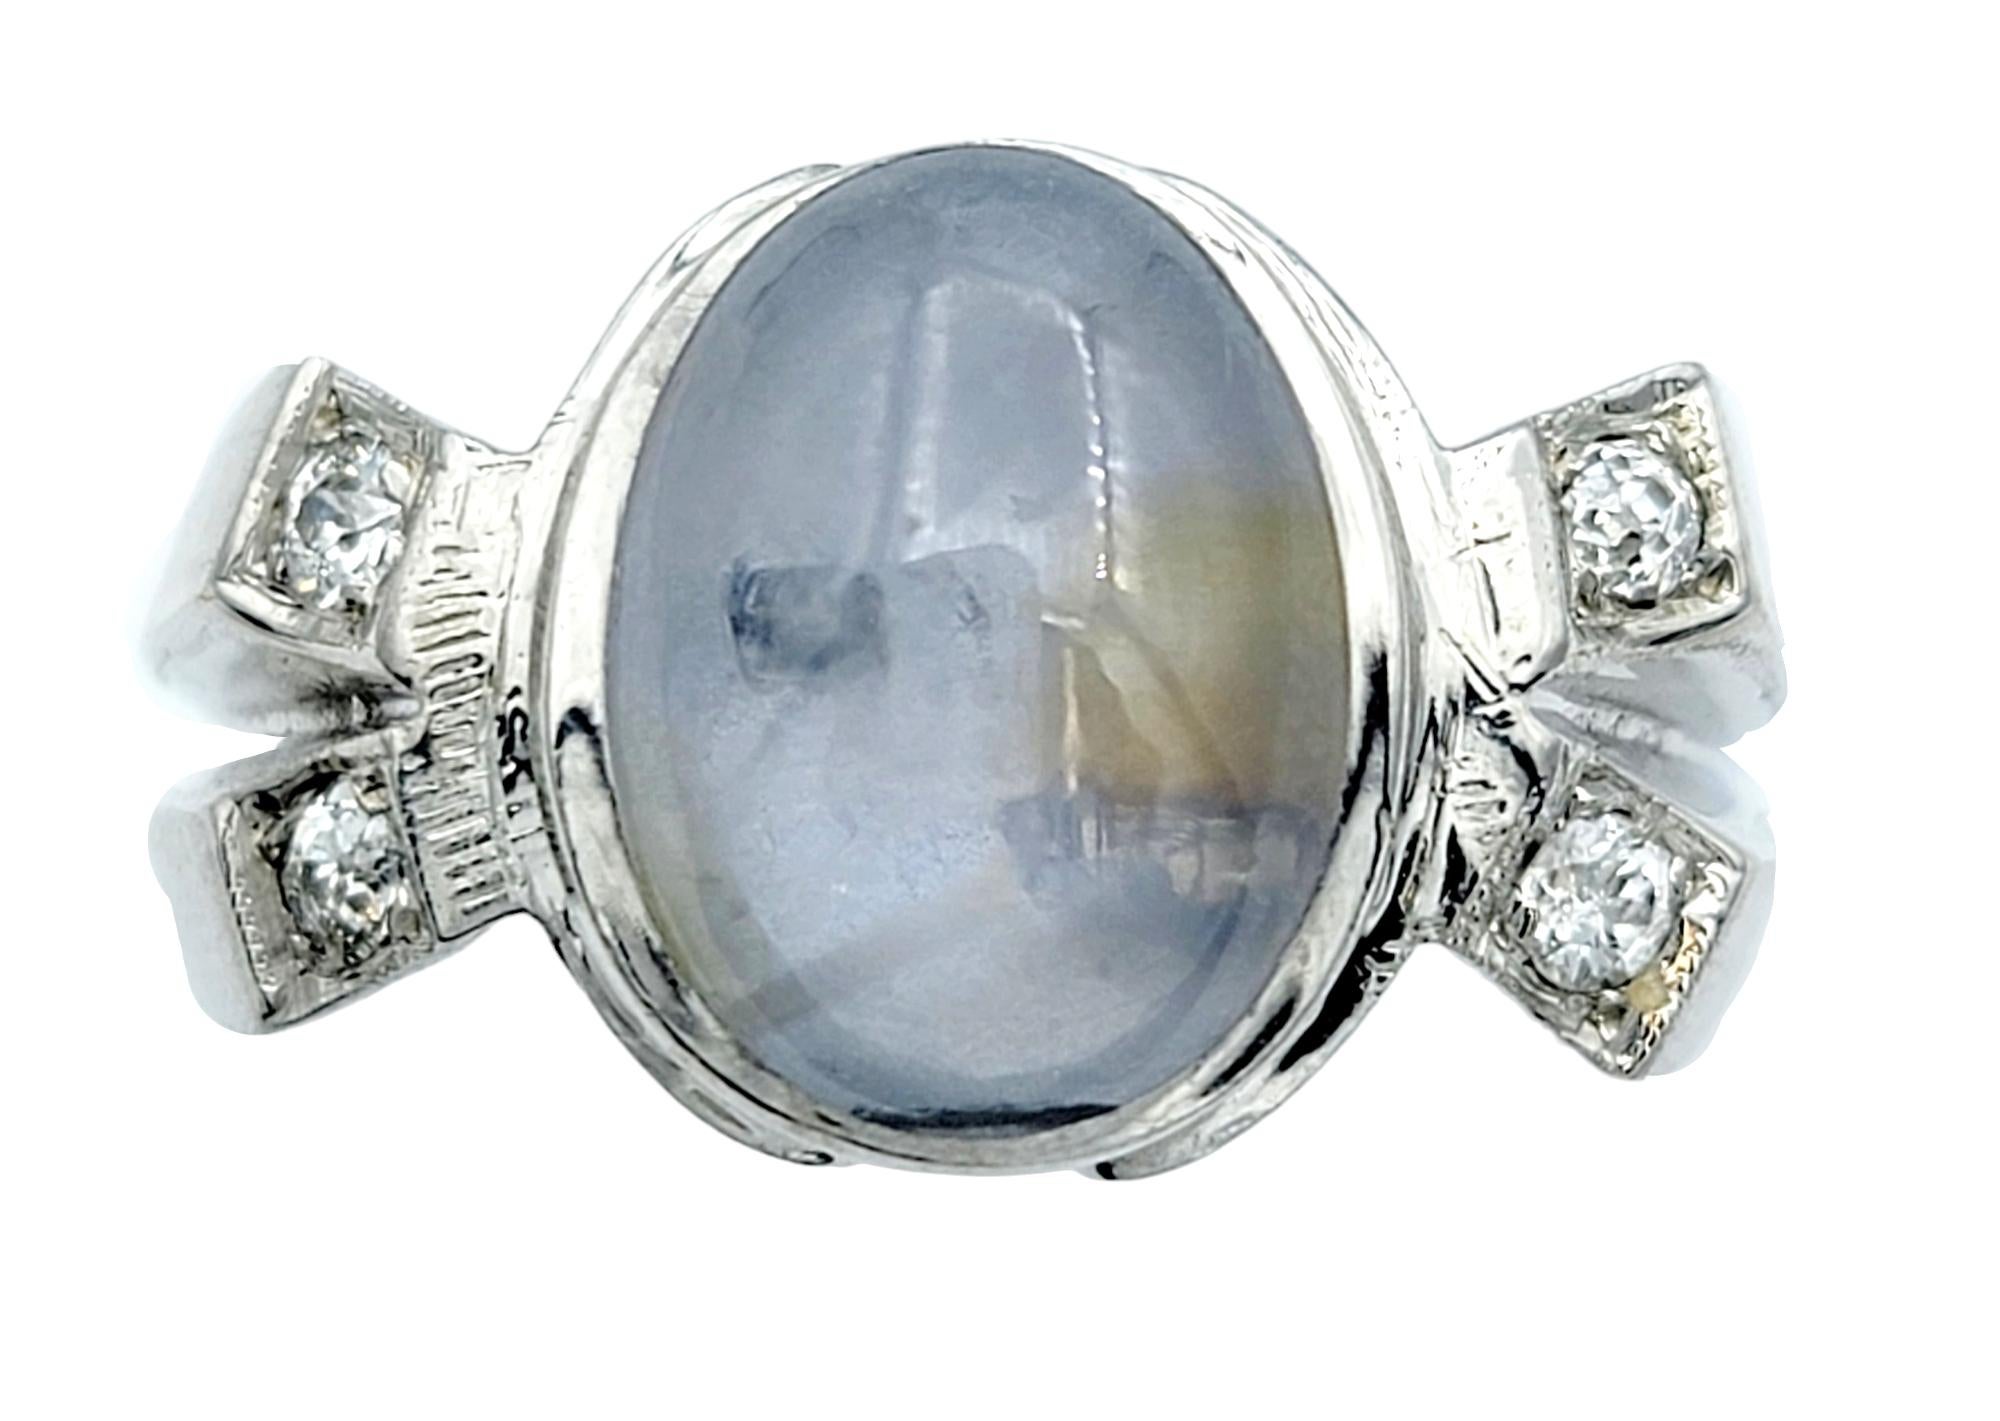 Ring Size: 9.5

This unique 14 karat white gold ring is an elegant piece that exudes timeless charm. At its center lies an oval cabochon star sapphire with a soft, light grayish-blue hue, reminiscent of a tranquil sky. Gracefully adorning the ring